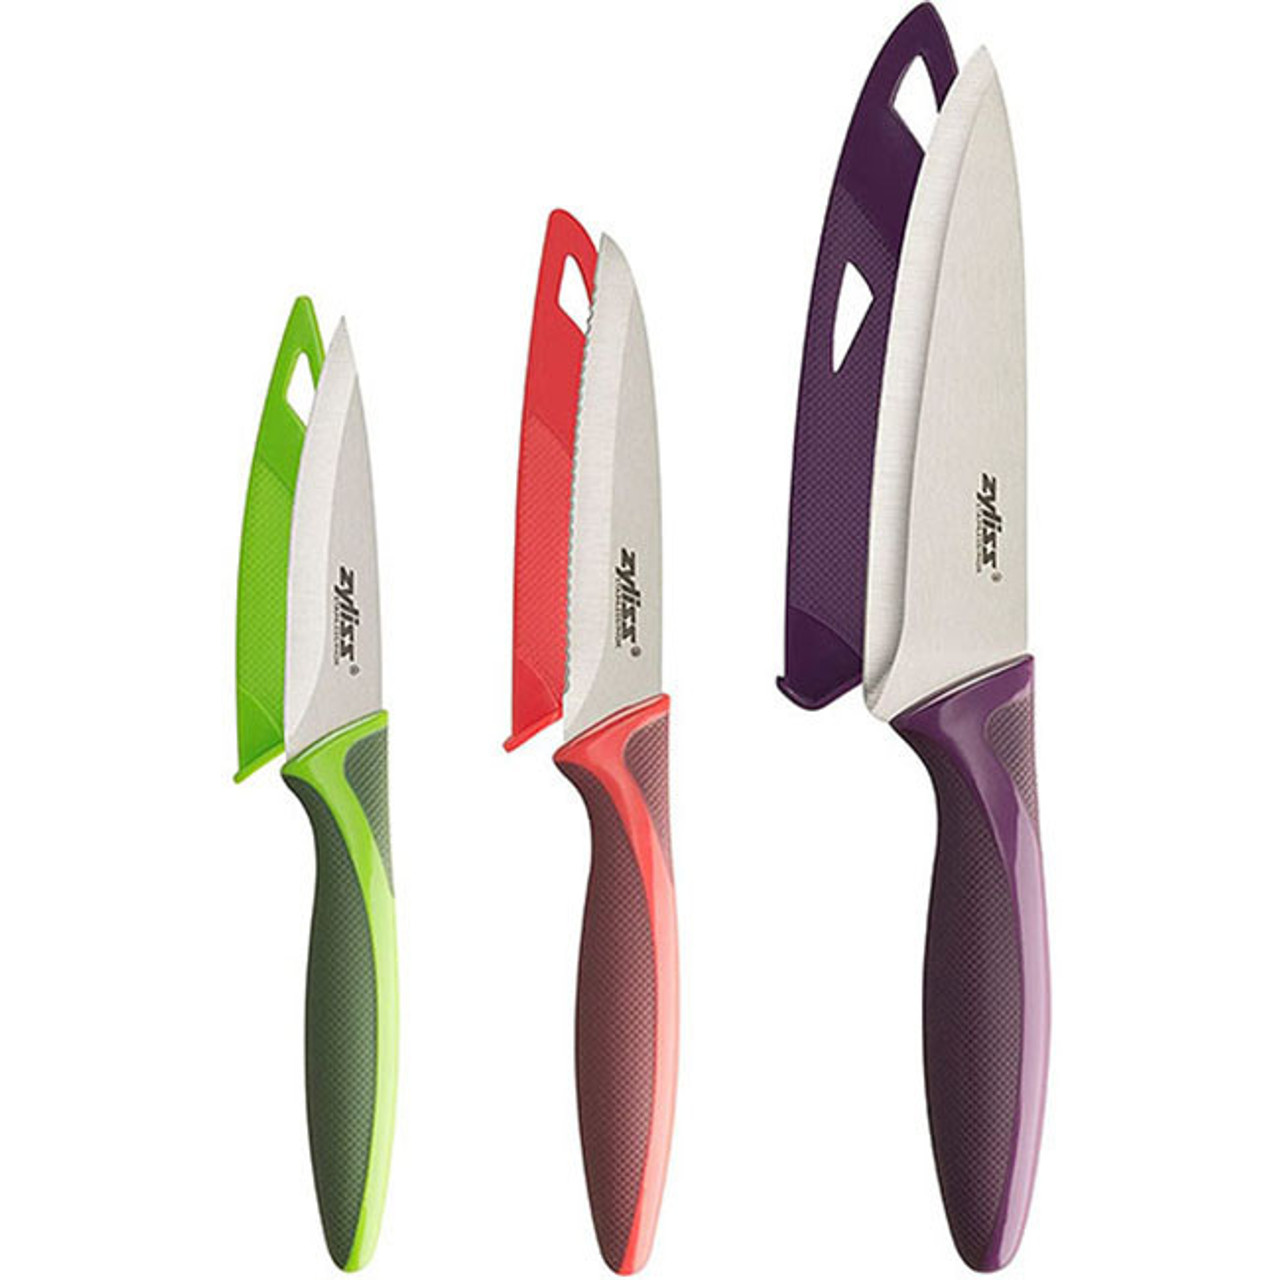 https://cdn11.bigcommerce.com/s-8ek7z3h3jn/images/stencil/1280x1280/products/8608/45793/zyliss-e72404-3-piece-knife-set-with-protection-covers__71317.1678239742.jpg?c=1